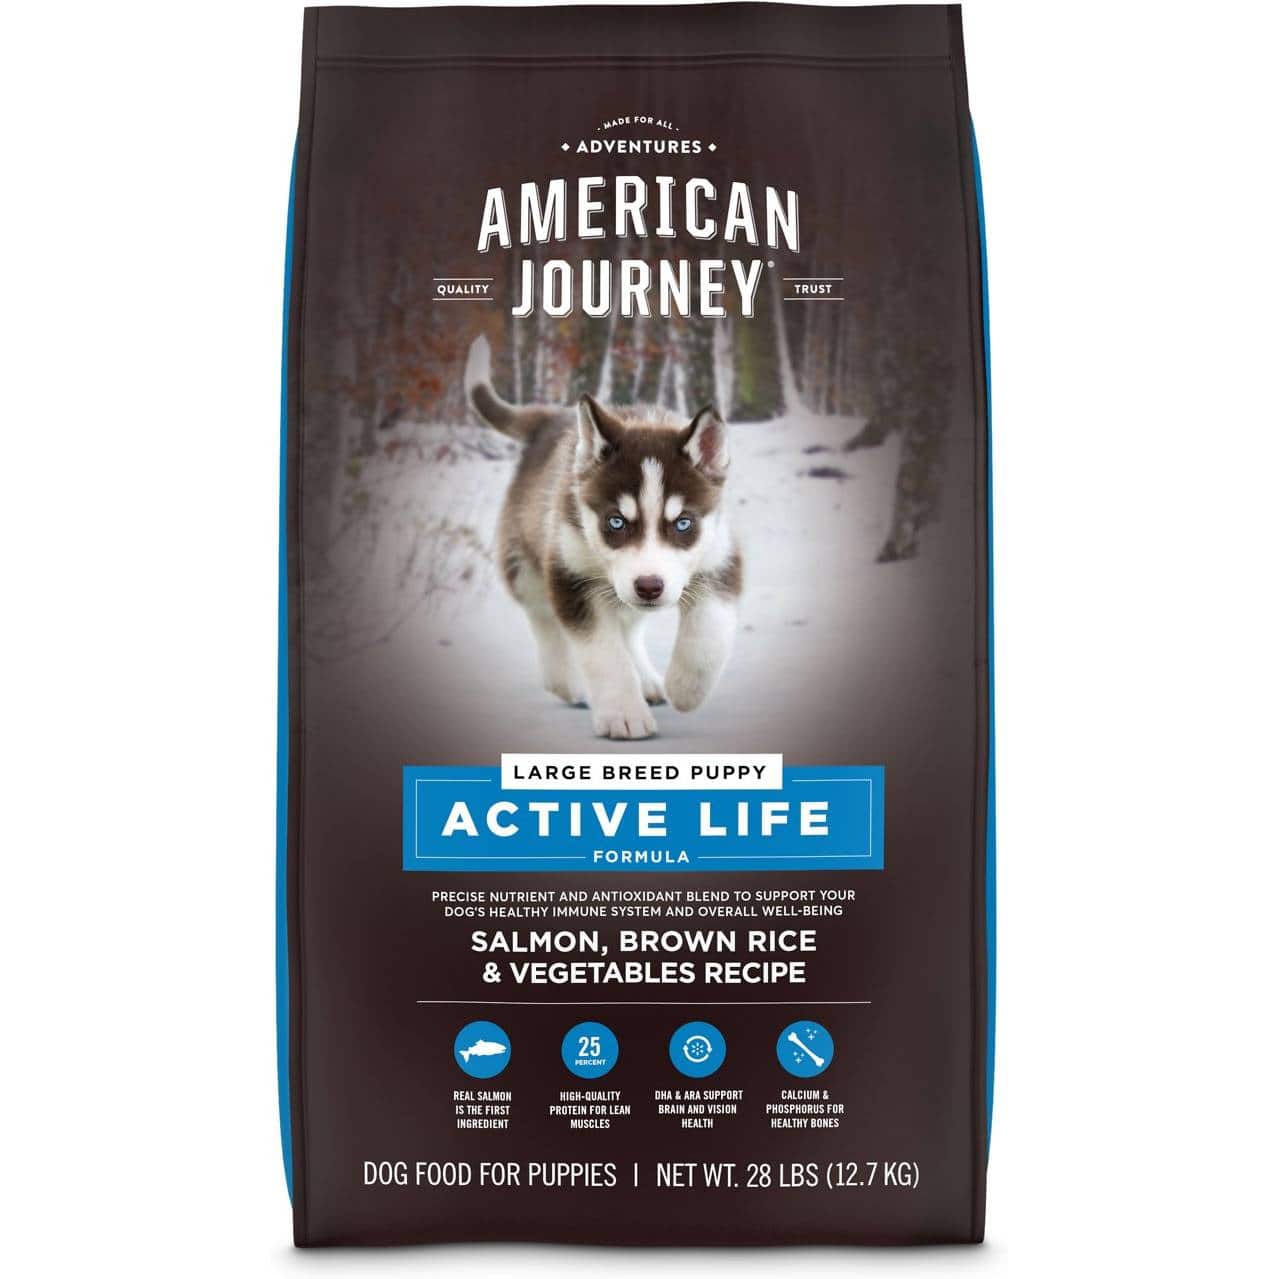 American Journey Active Life Formula Large Breed Puppy Salmon, Brown Rice & Vegetables Recipe Dry Dog Food (1)